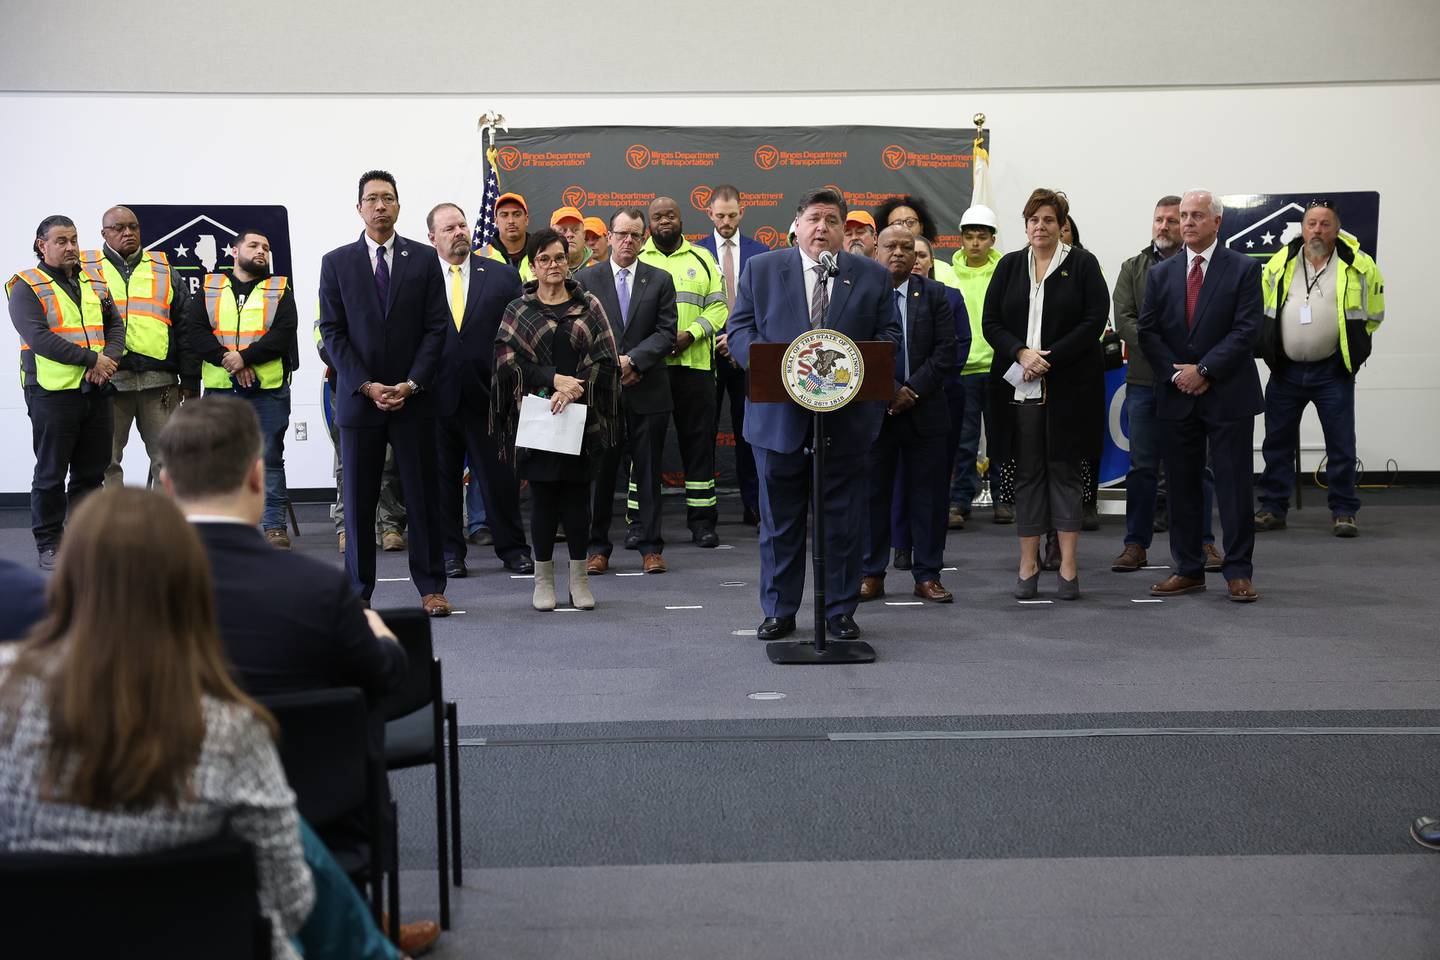 Governor JB Pritzker stands with members of the Illinois Department of Transportation along with local officials and community leaders at a press conference on reaching a key milestone for the  $1.3 Billion I-80 corridor project on Wednesday, Nov. 1, 2023 at Joliet Junior College.